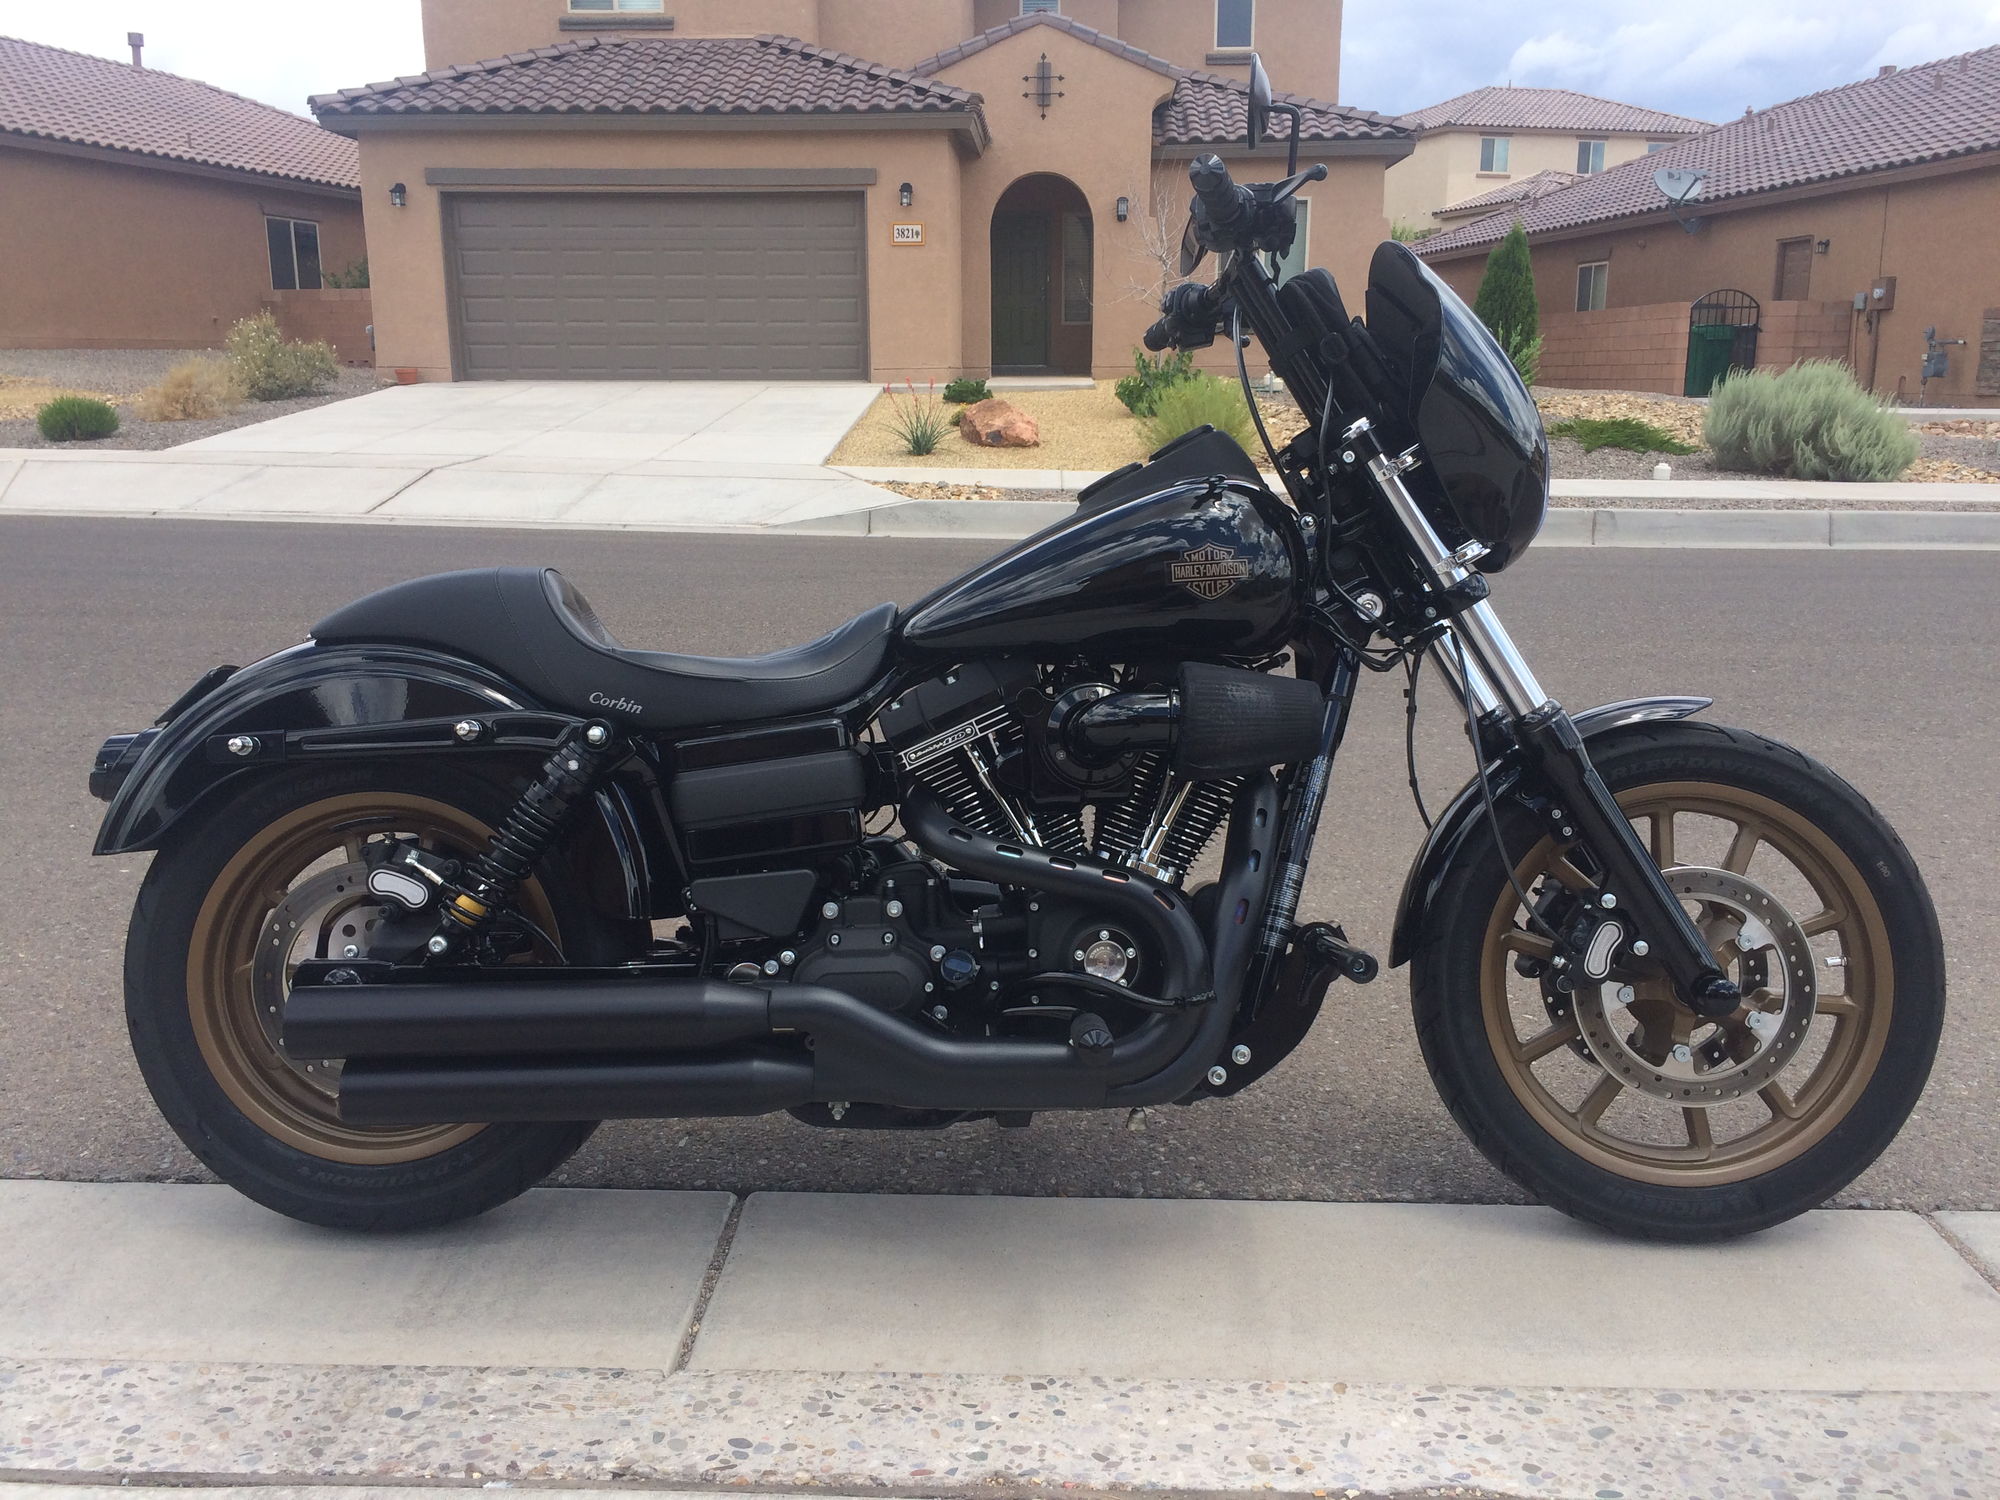 New Low Rider S - Page 119 - Harley Davidson Forums